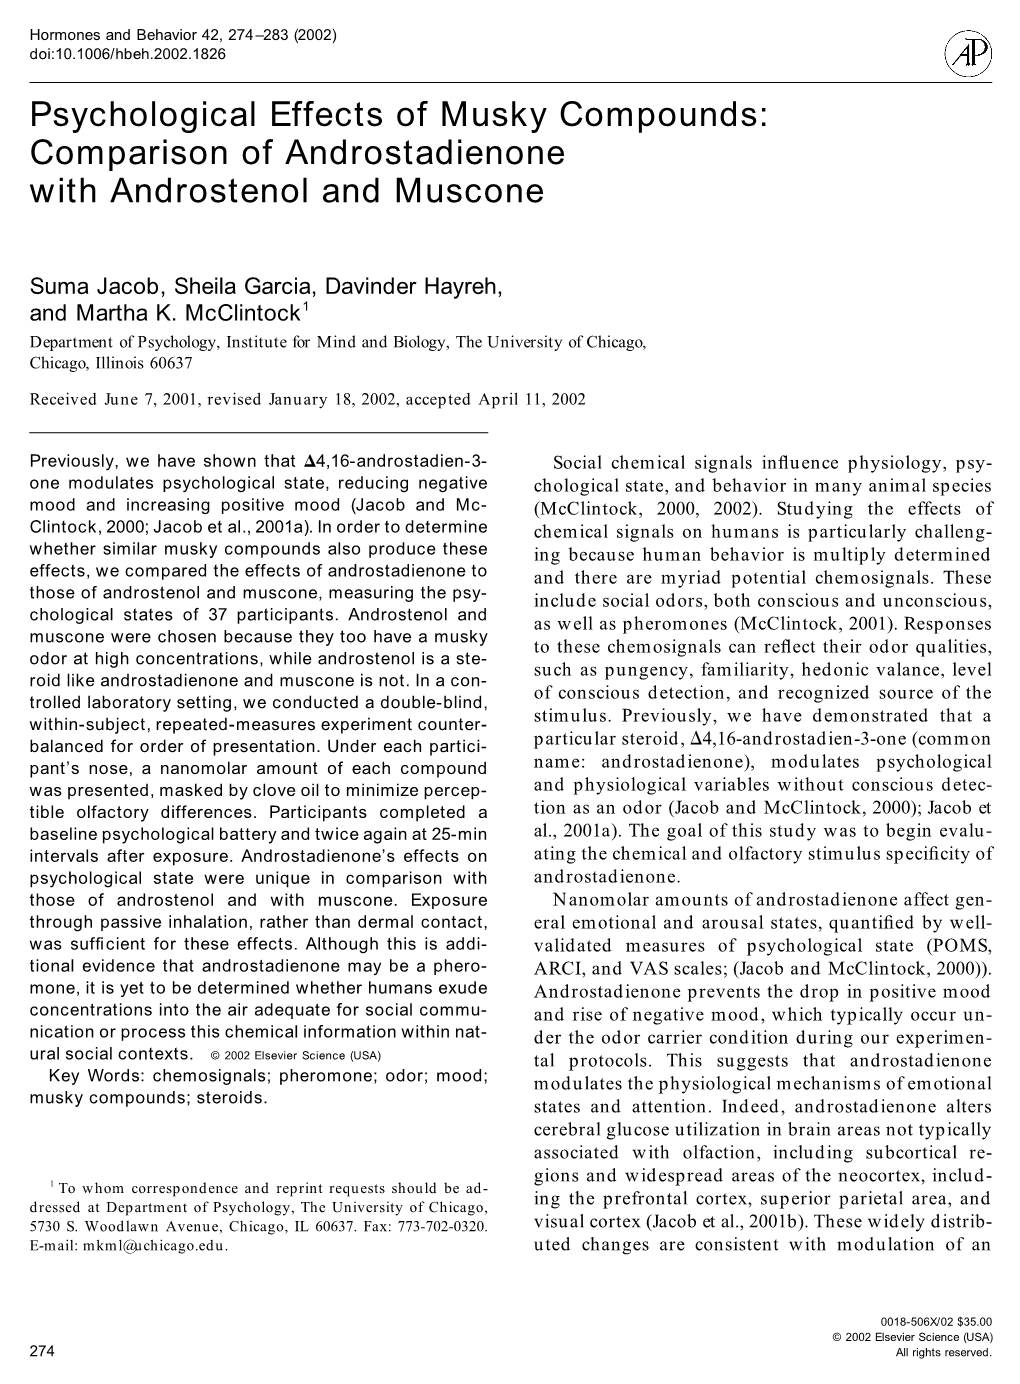 Comparison of Androstadienone with Androstenol and Muscone